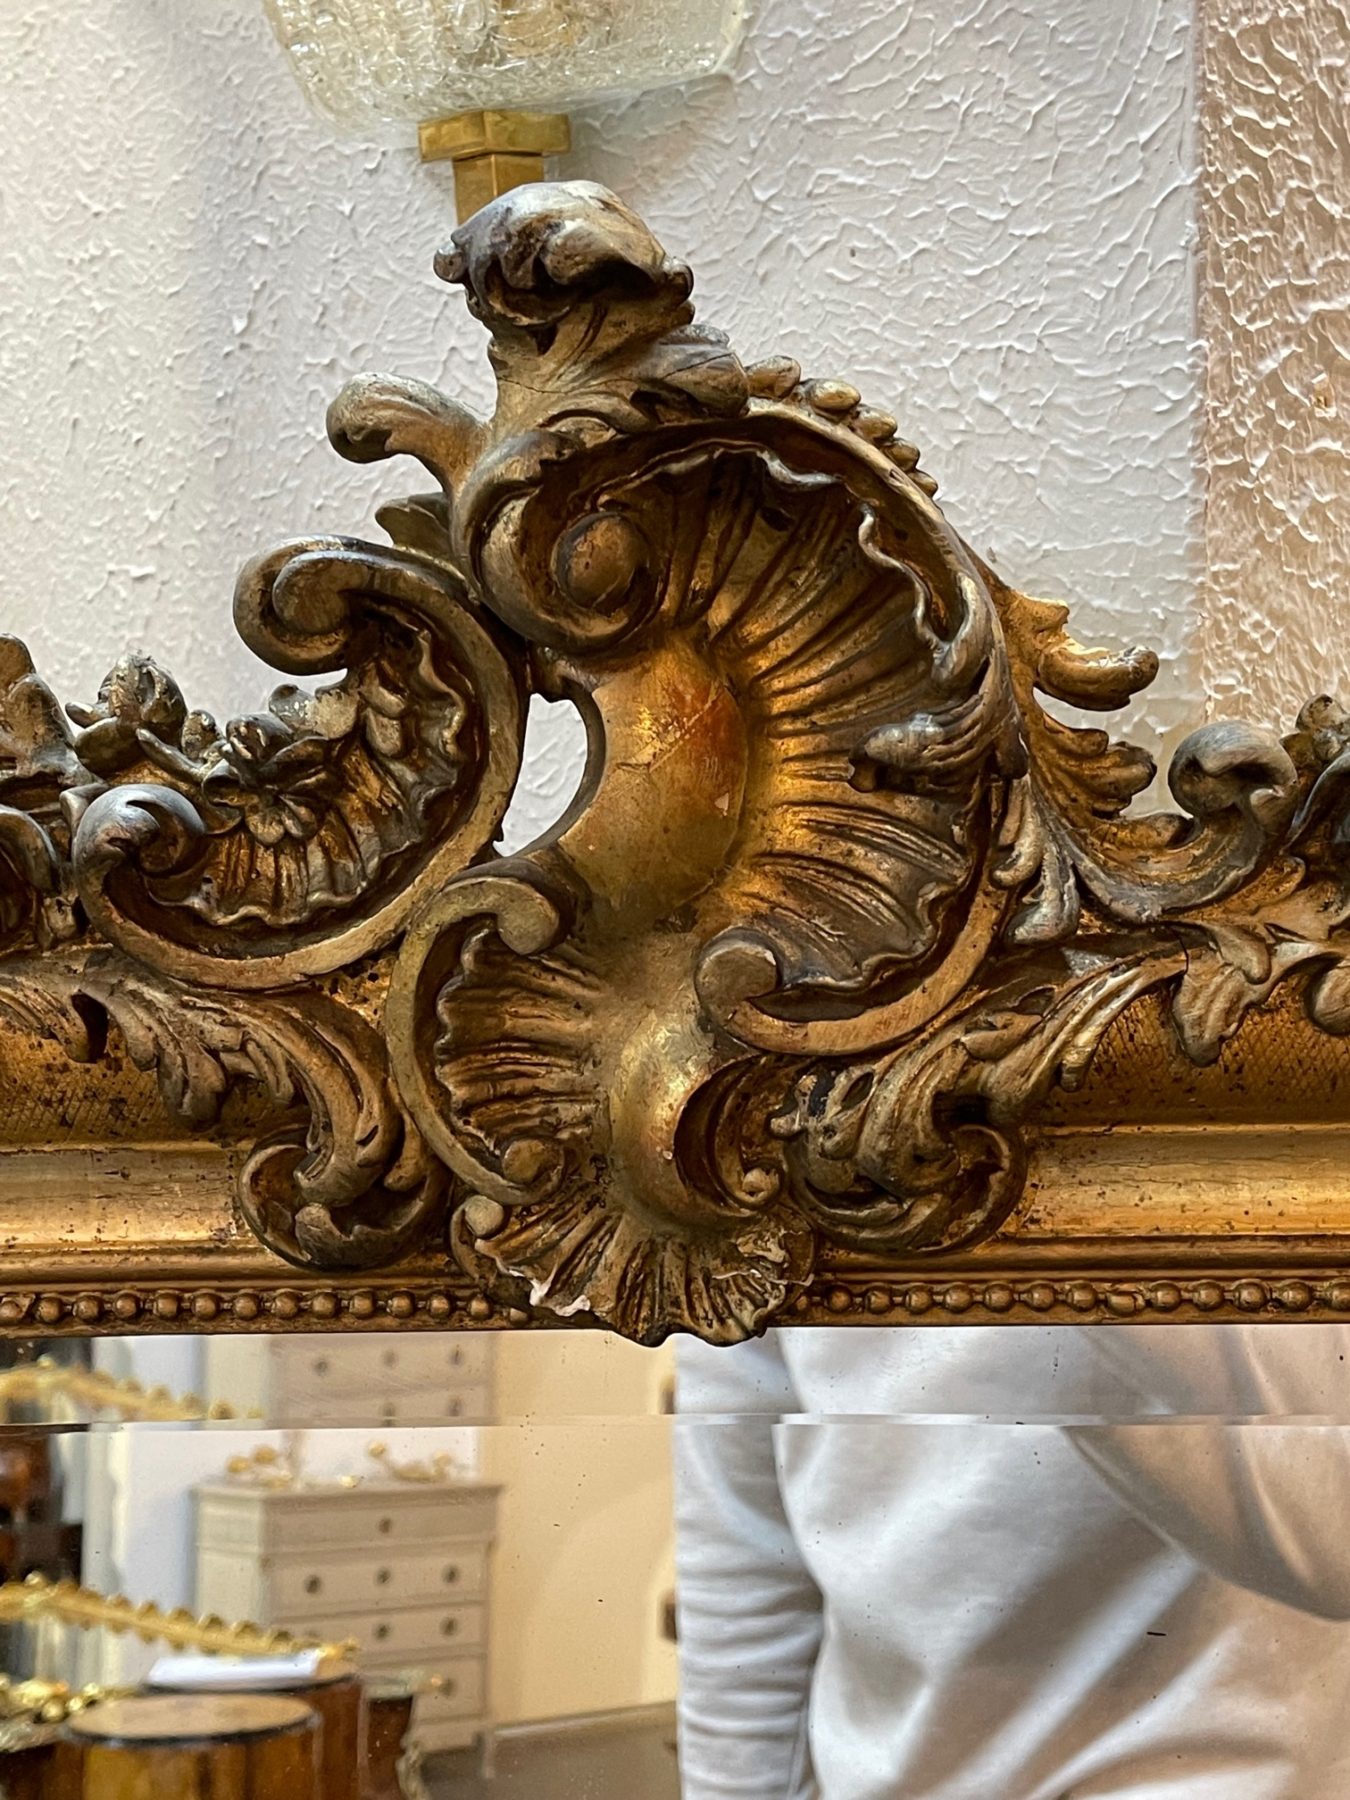 French 19th Century Gold Gilt Louis Philippe Mirror with Crest - Fireside  Antiques